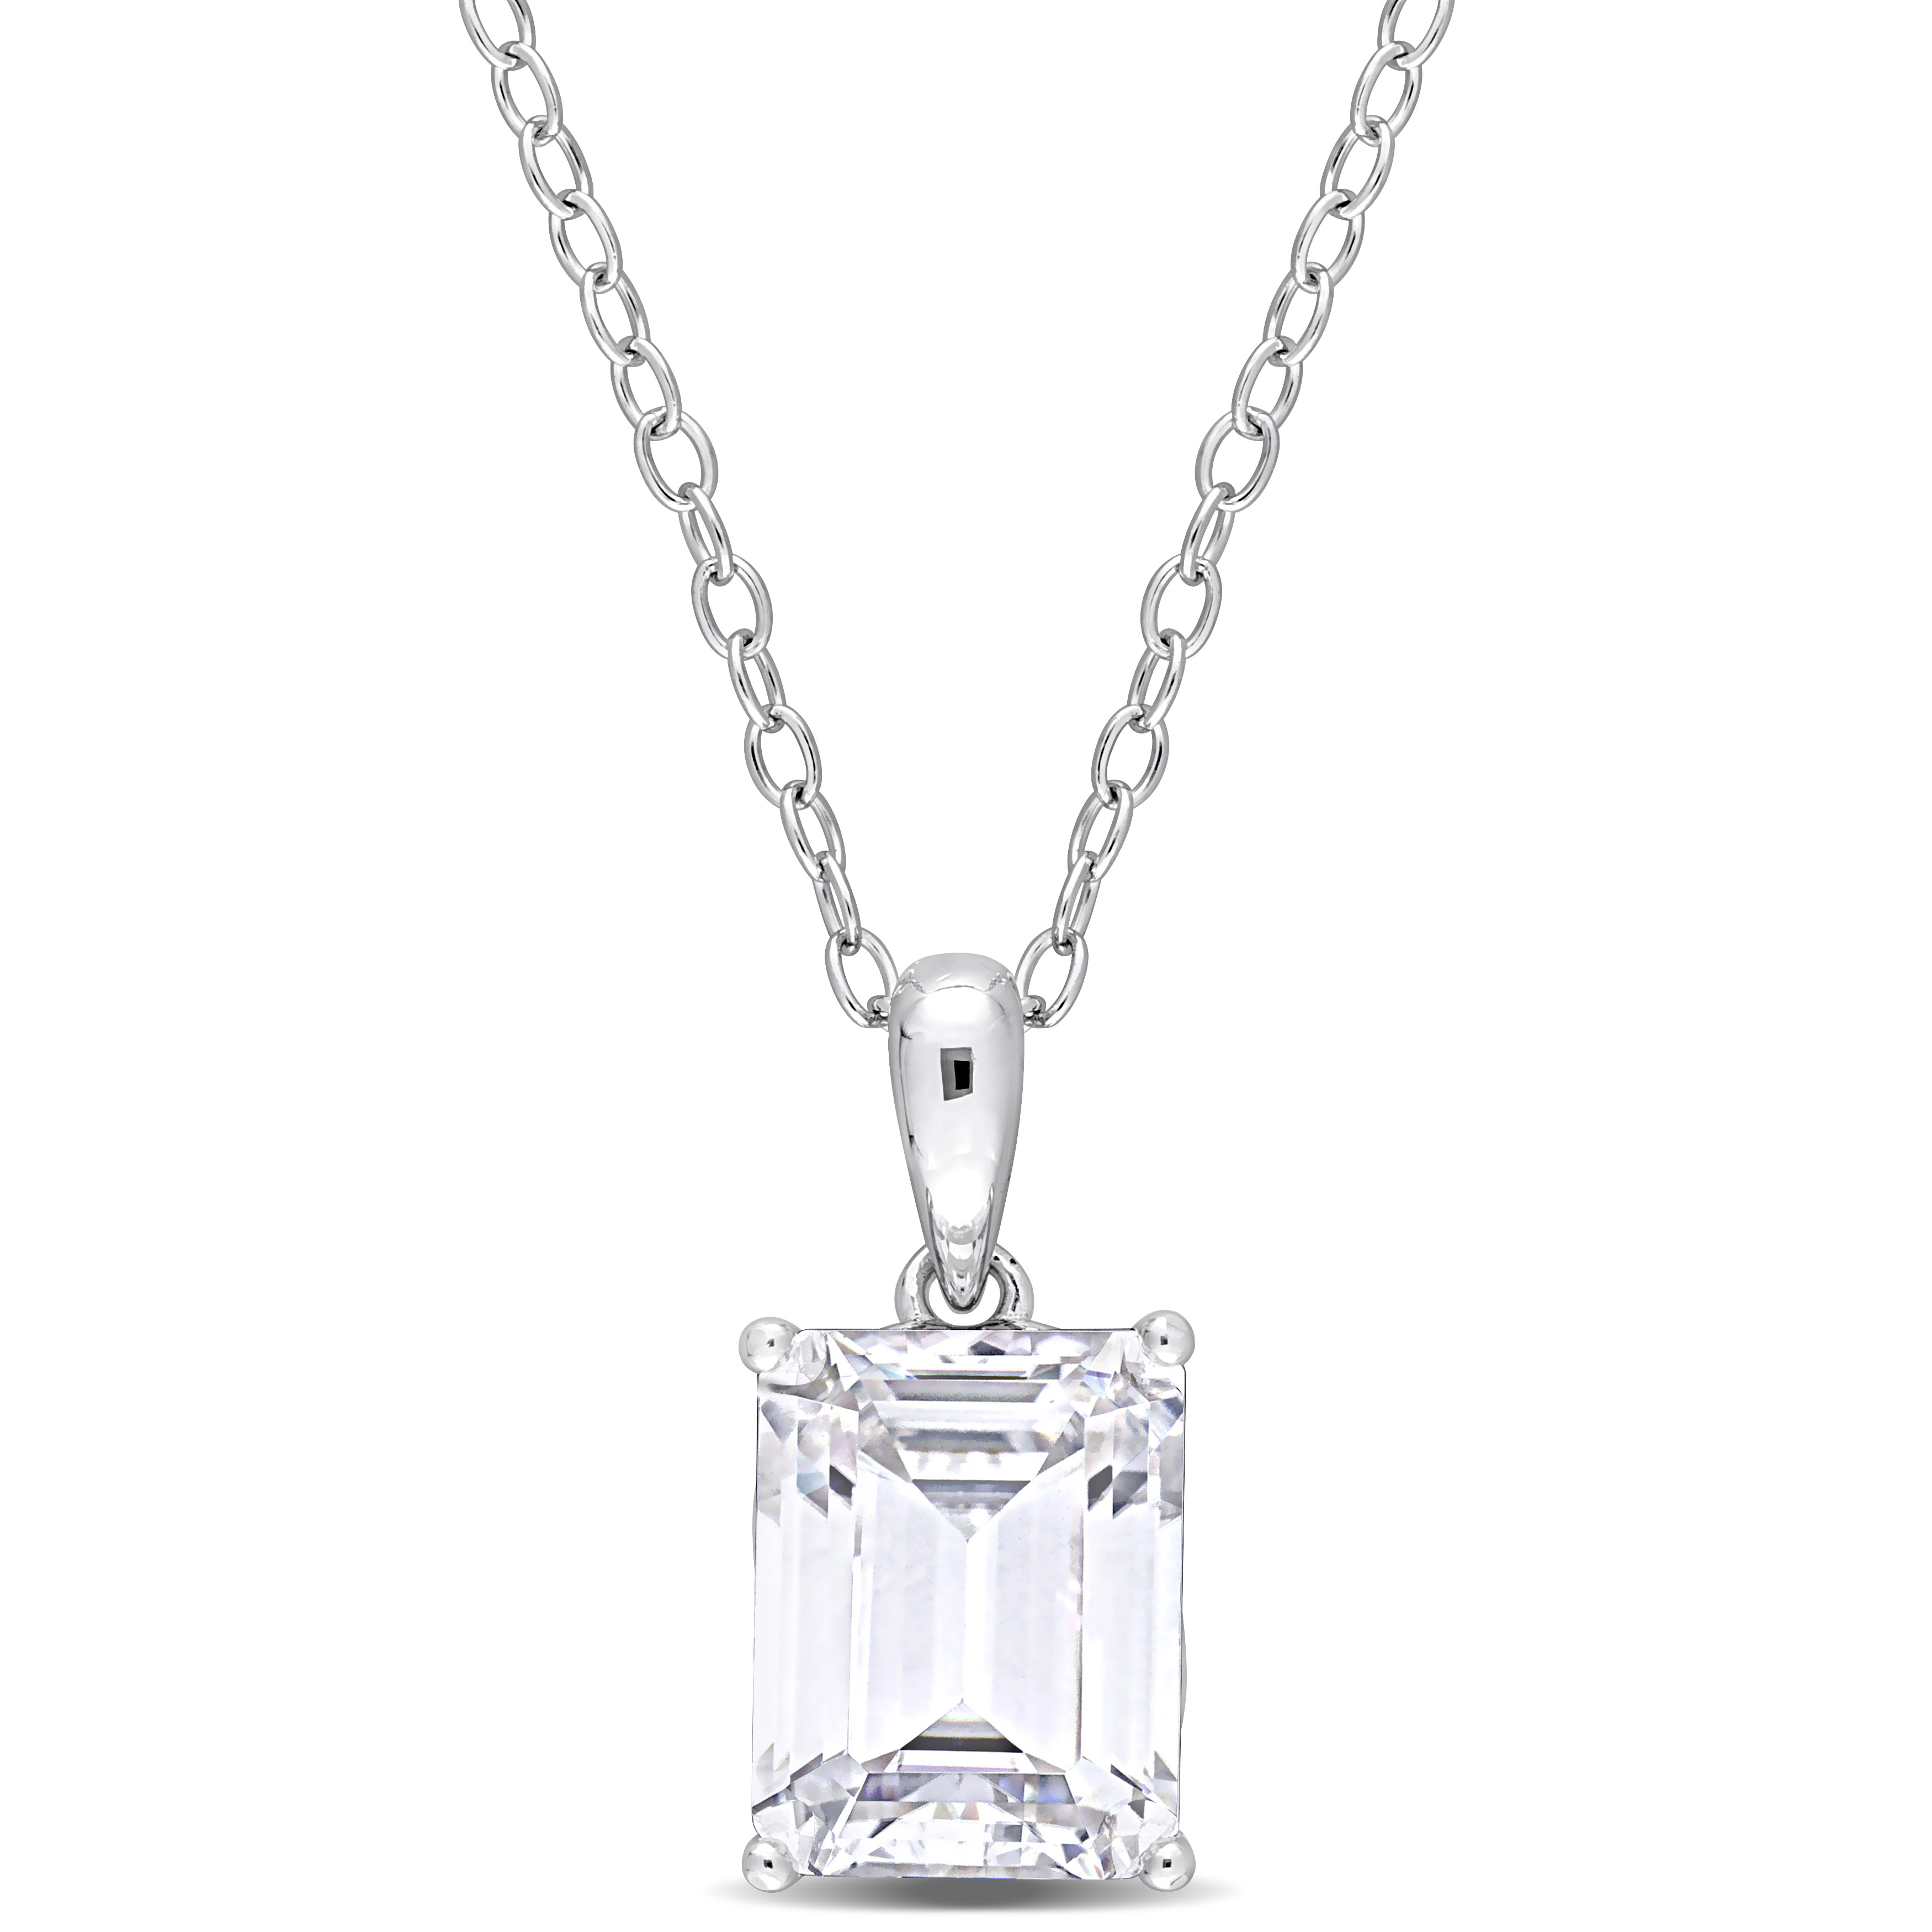 2 3/4 CT TGW Emerald Cut White Topaz Solitaire Heart Design Pendant with Chain in Sterling Silver - 18 in.